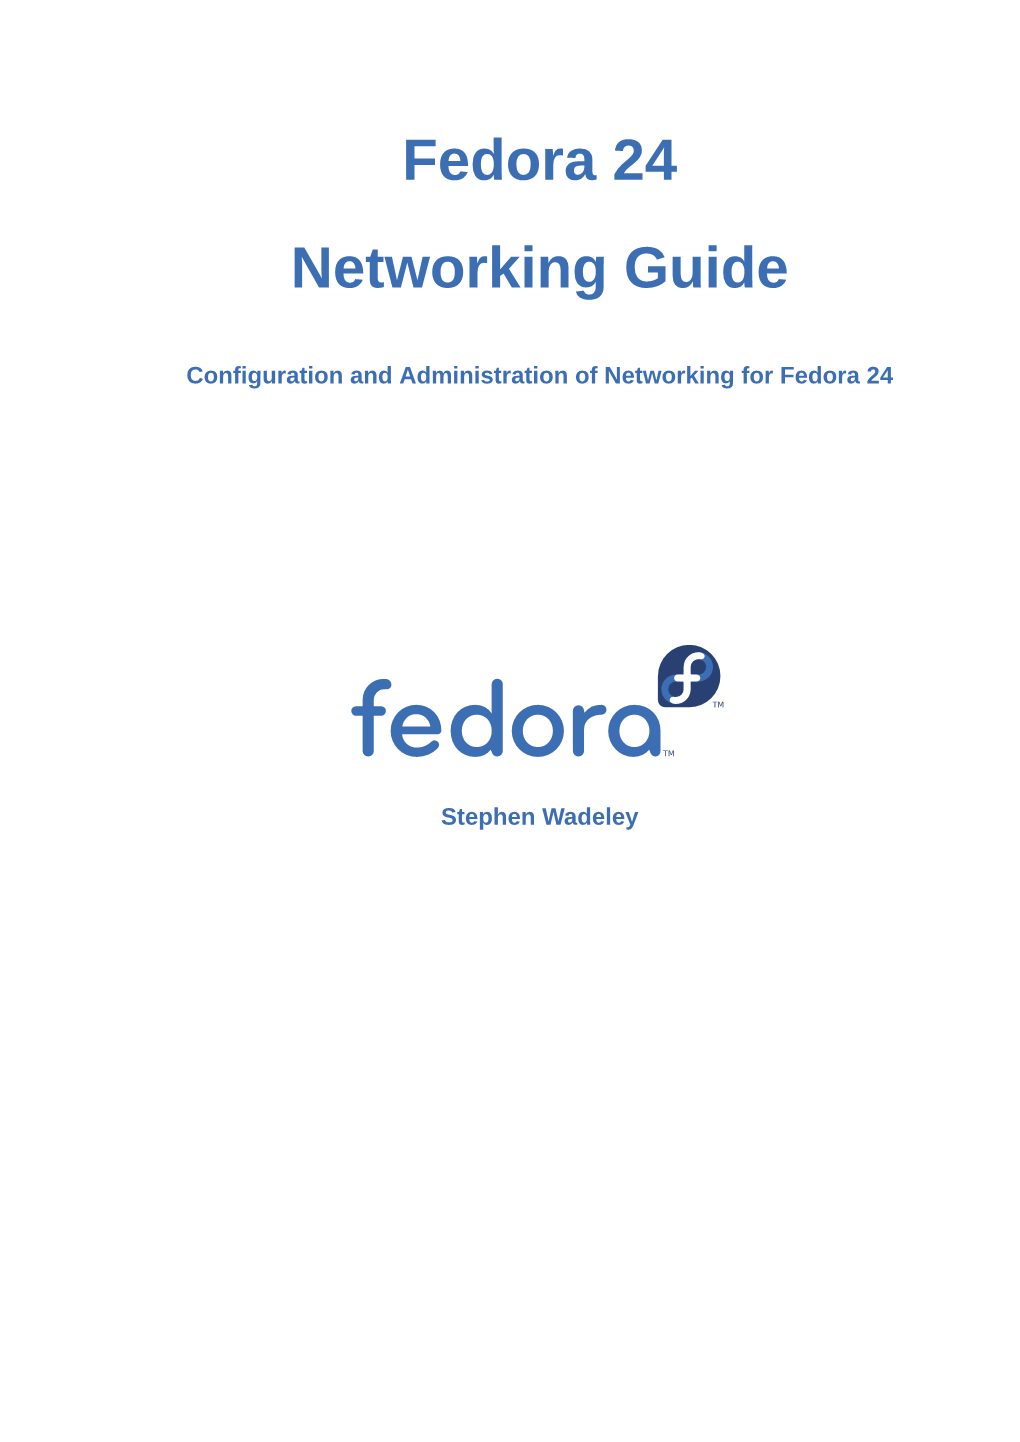 Fedora 24 Networking Guide